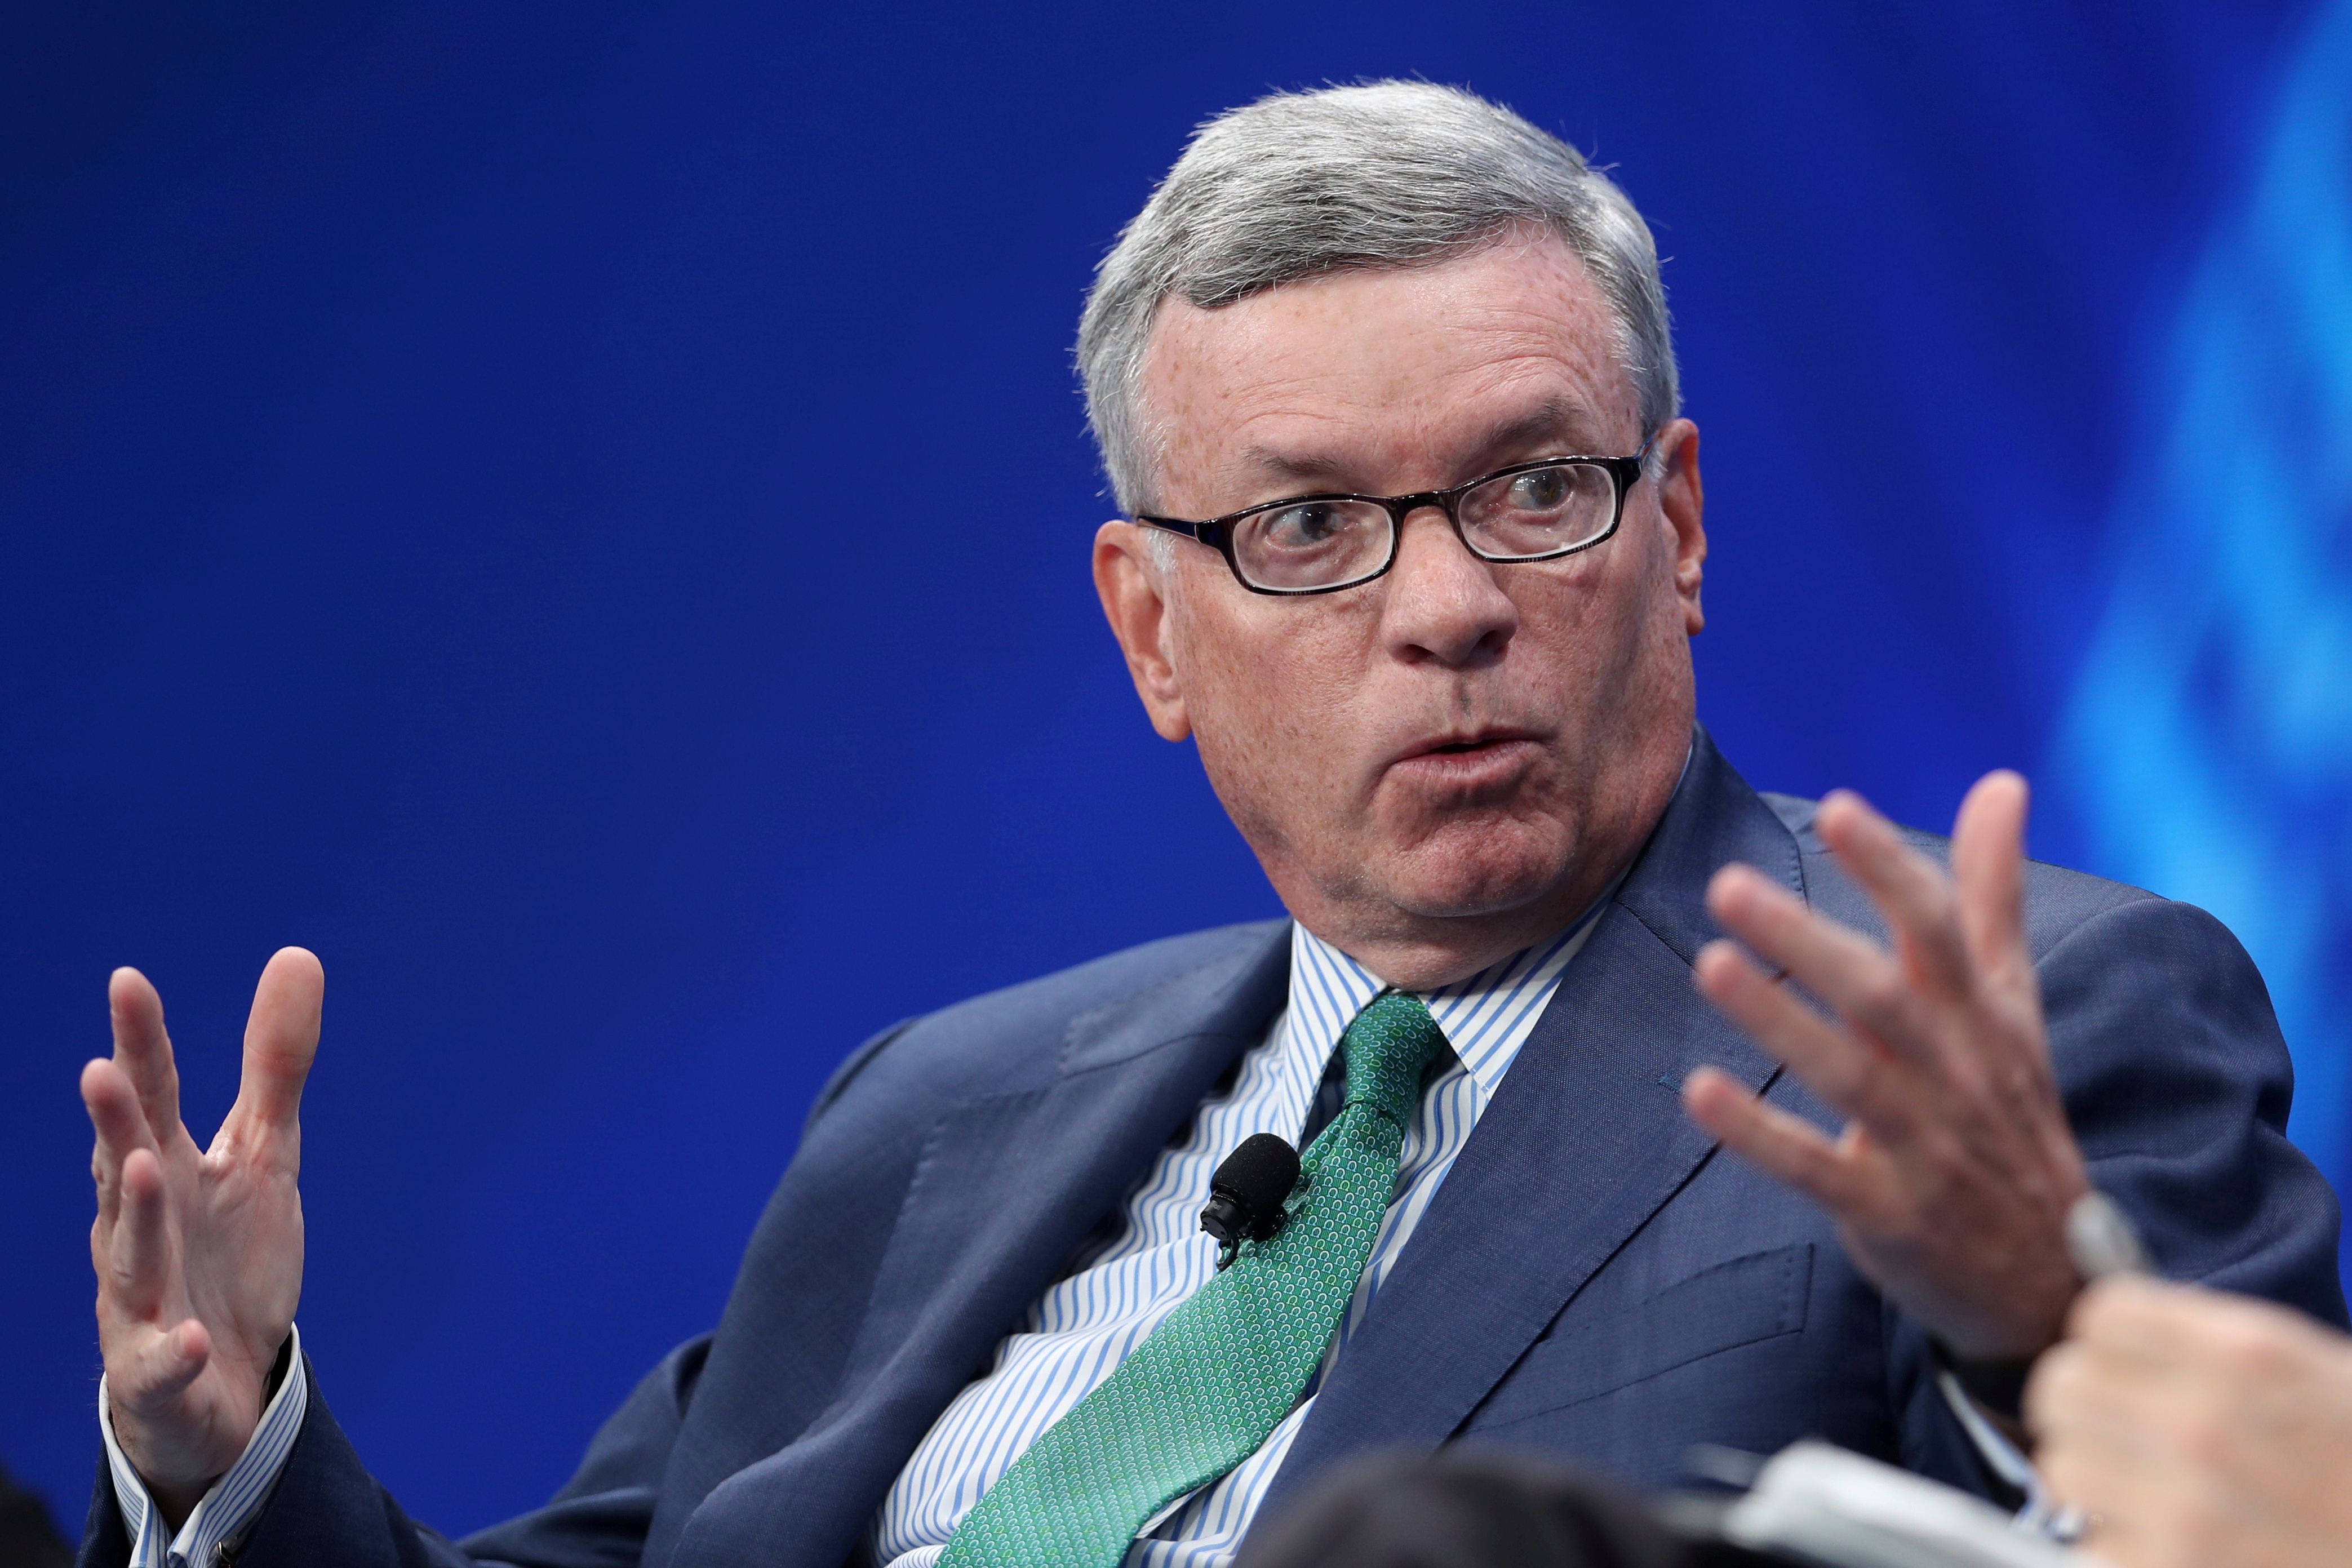 Alfred Kelly, Jr., CEO, Visa Inc. speaks at the 2019 Milken Institute Global Conference in Beverly Hills, California, U.S., April 29, 2019. REUTERS/Lucy Nicholson/File Photo